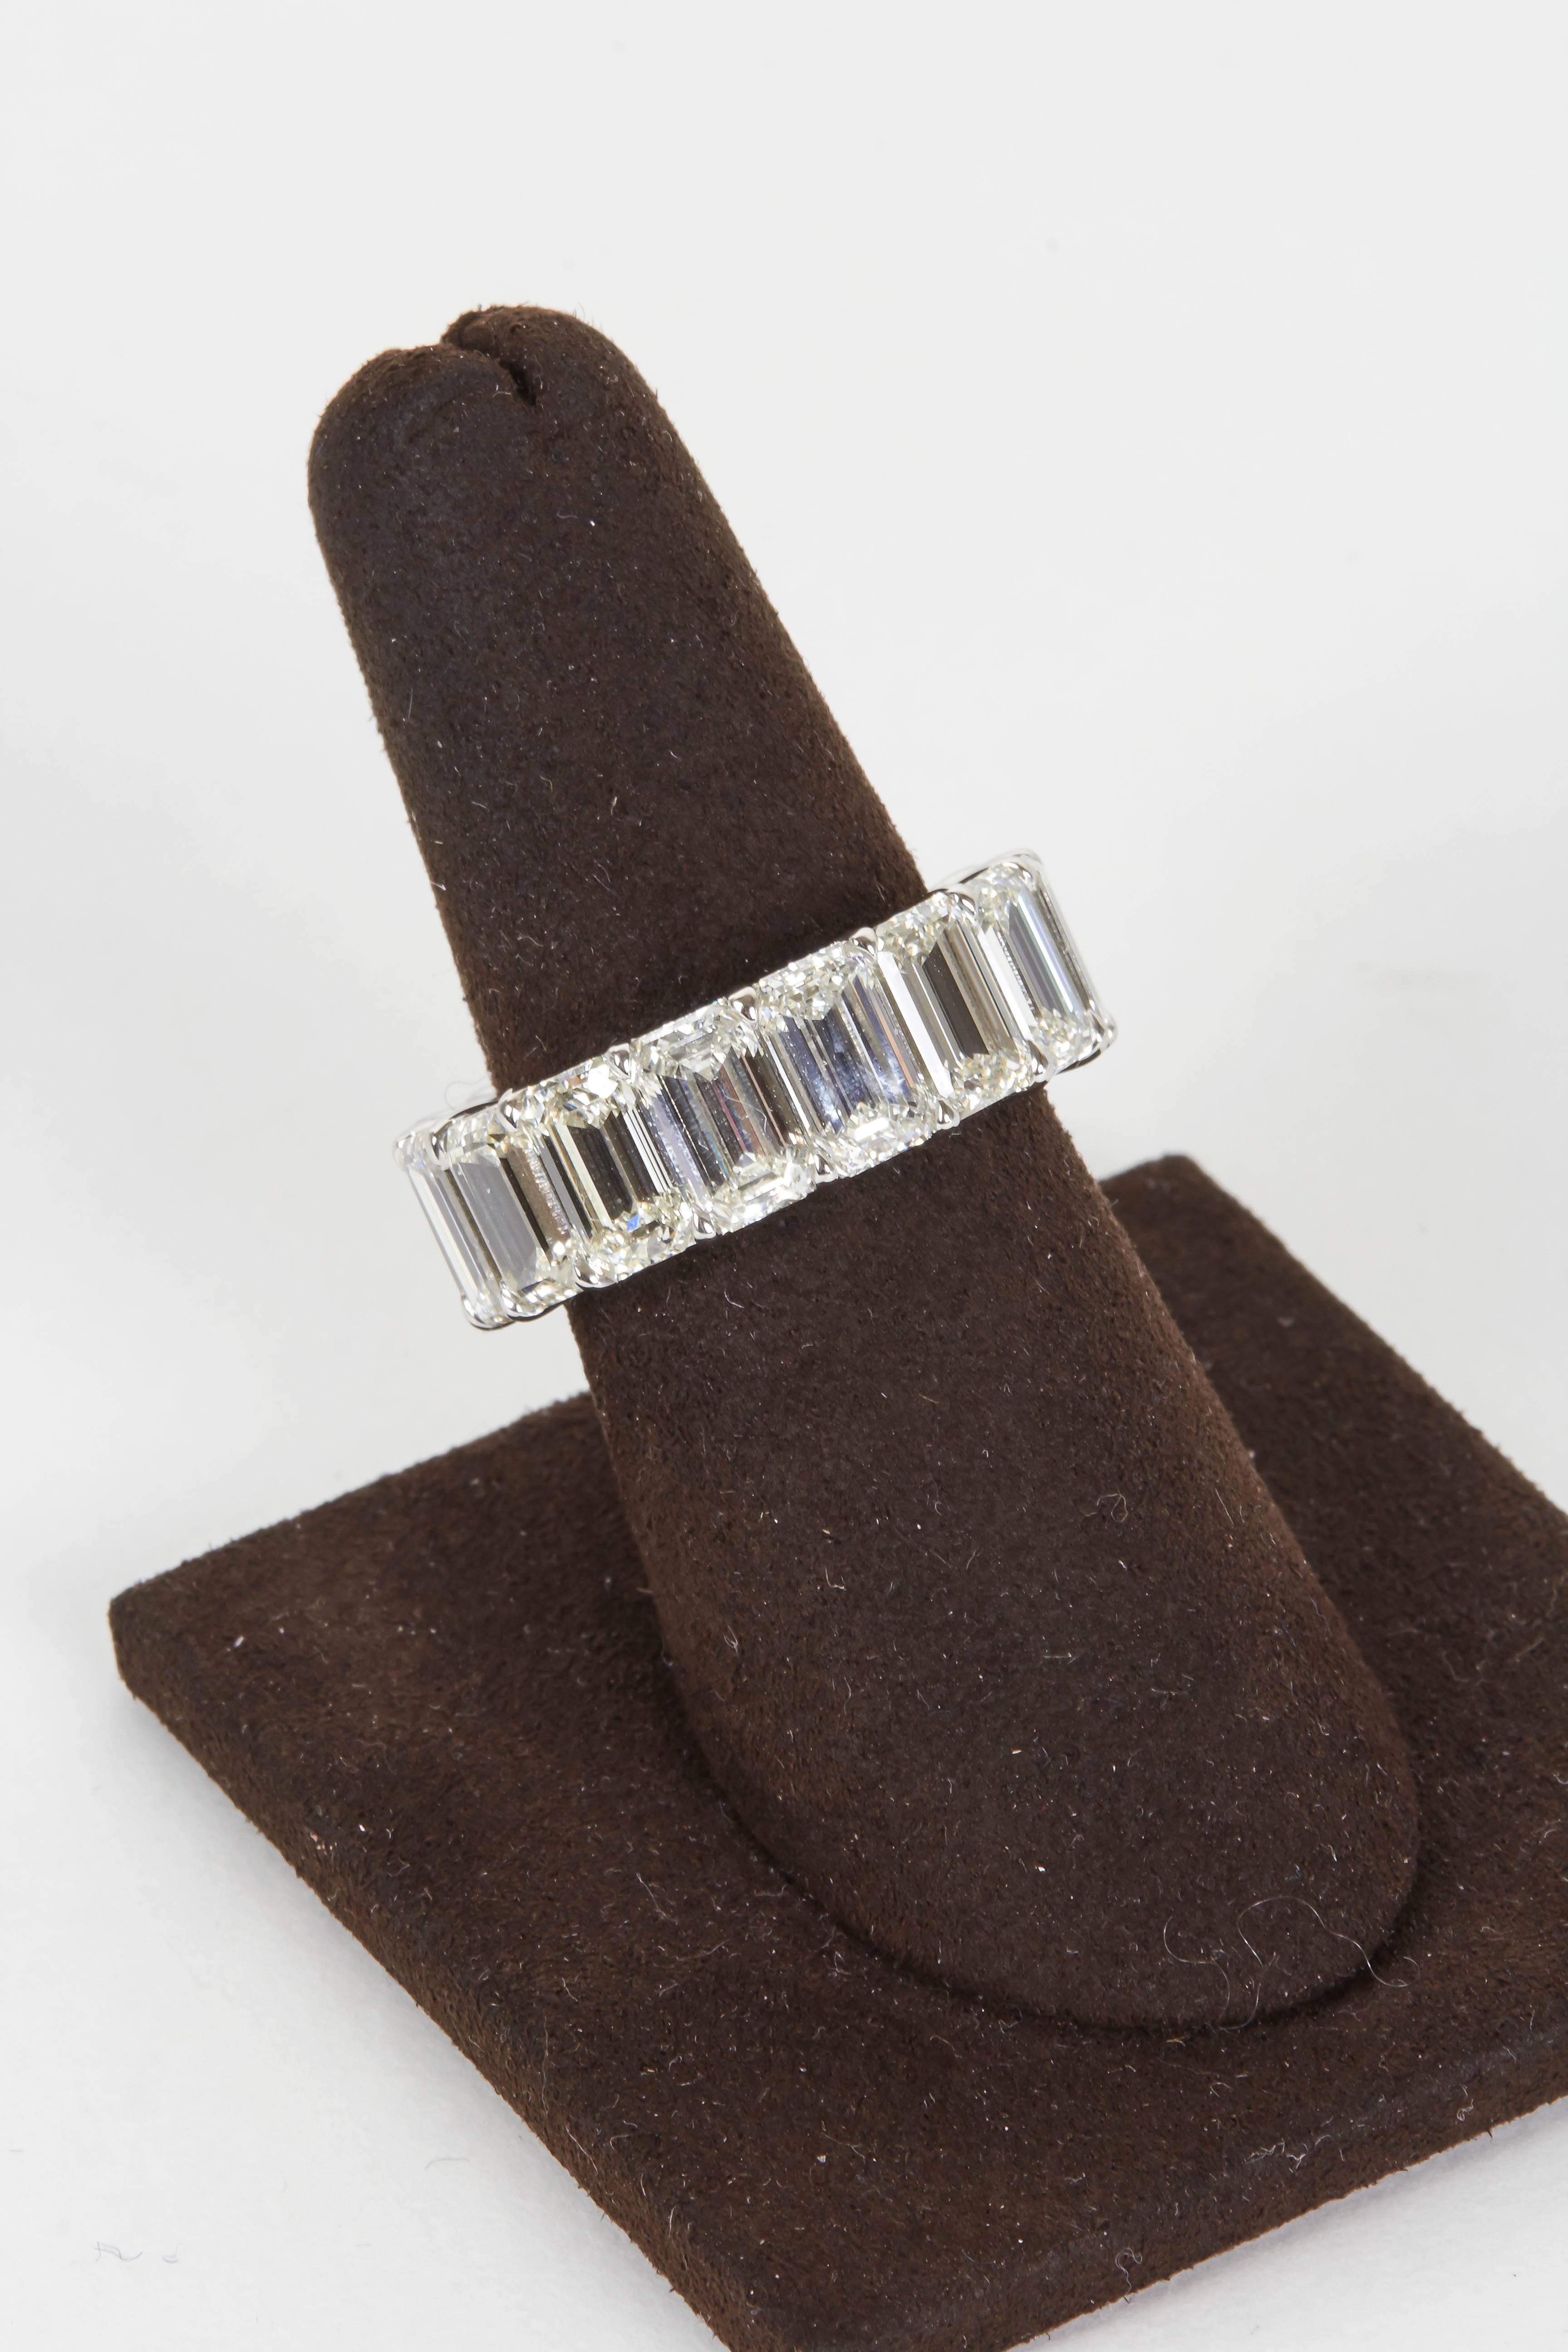 A magnificent diamond band.

15.88 carats of G color VVS-VS clarity Emerald Cut diamonds. 

Each diamond measures over 1 carat size. 

The ring size is 6.5 but can be adjusted.

A must have statement ring! 